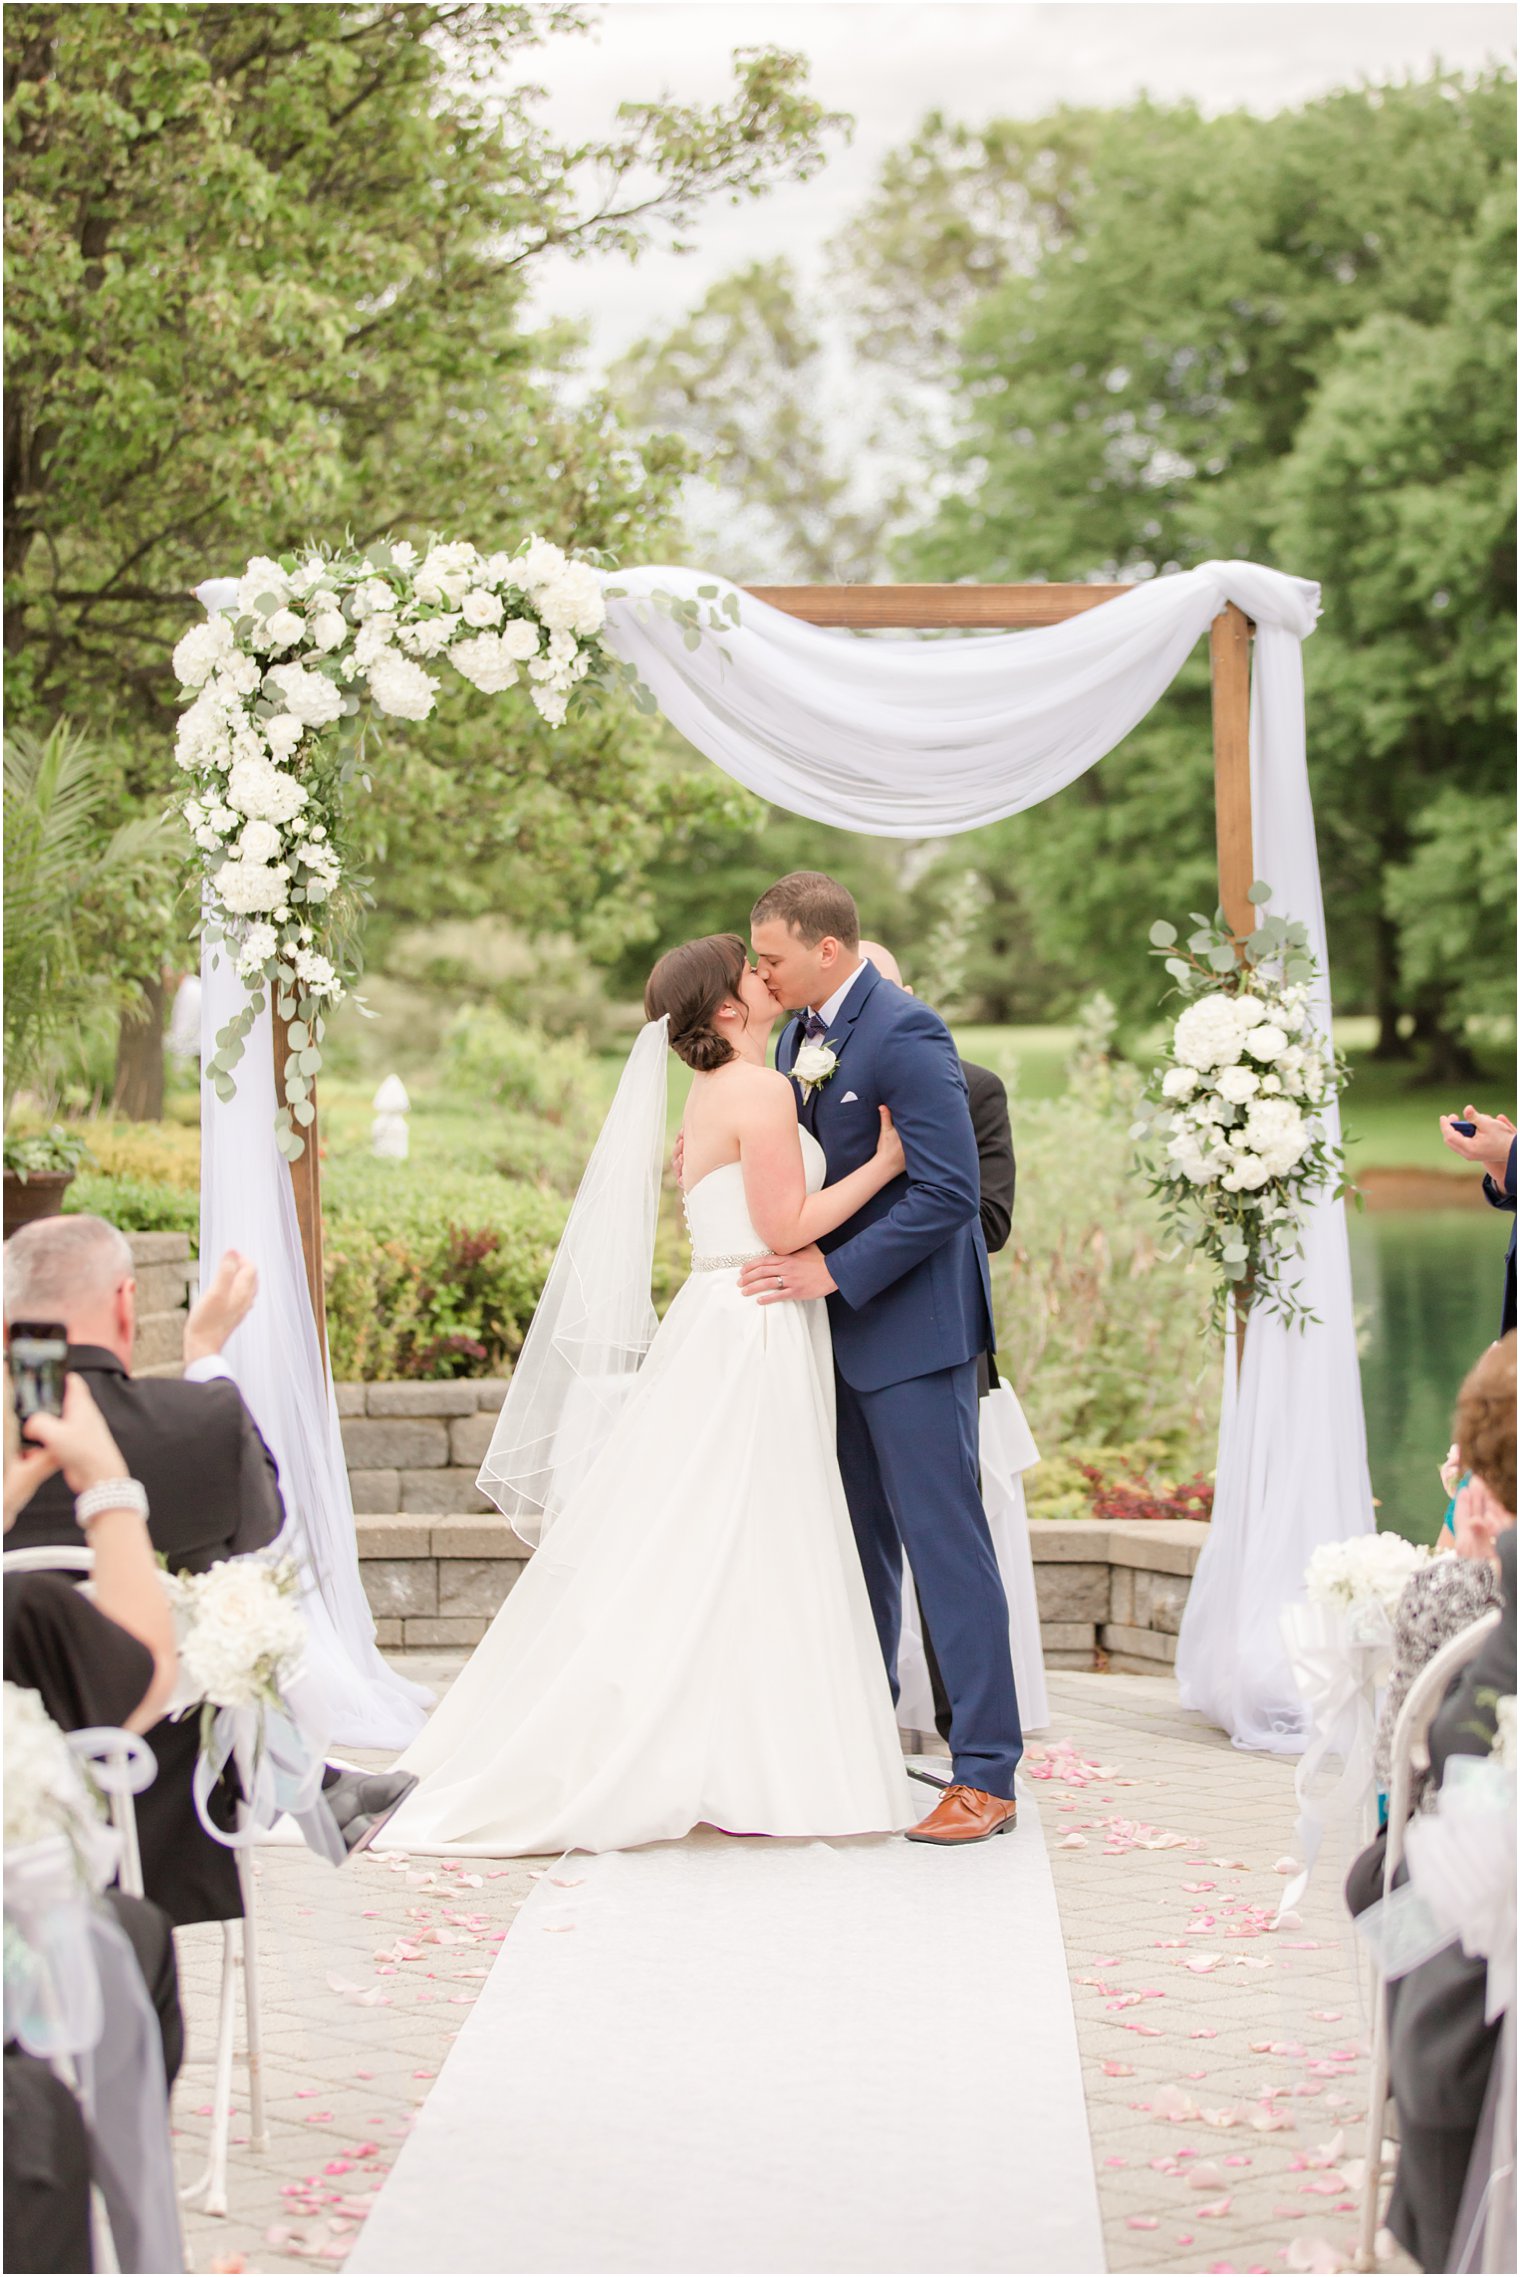 Wedding ceremony first kiss at Windows on the Water at Frogbridge in Millstone NJ